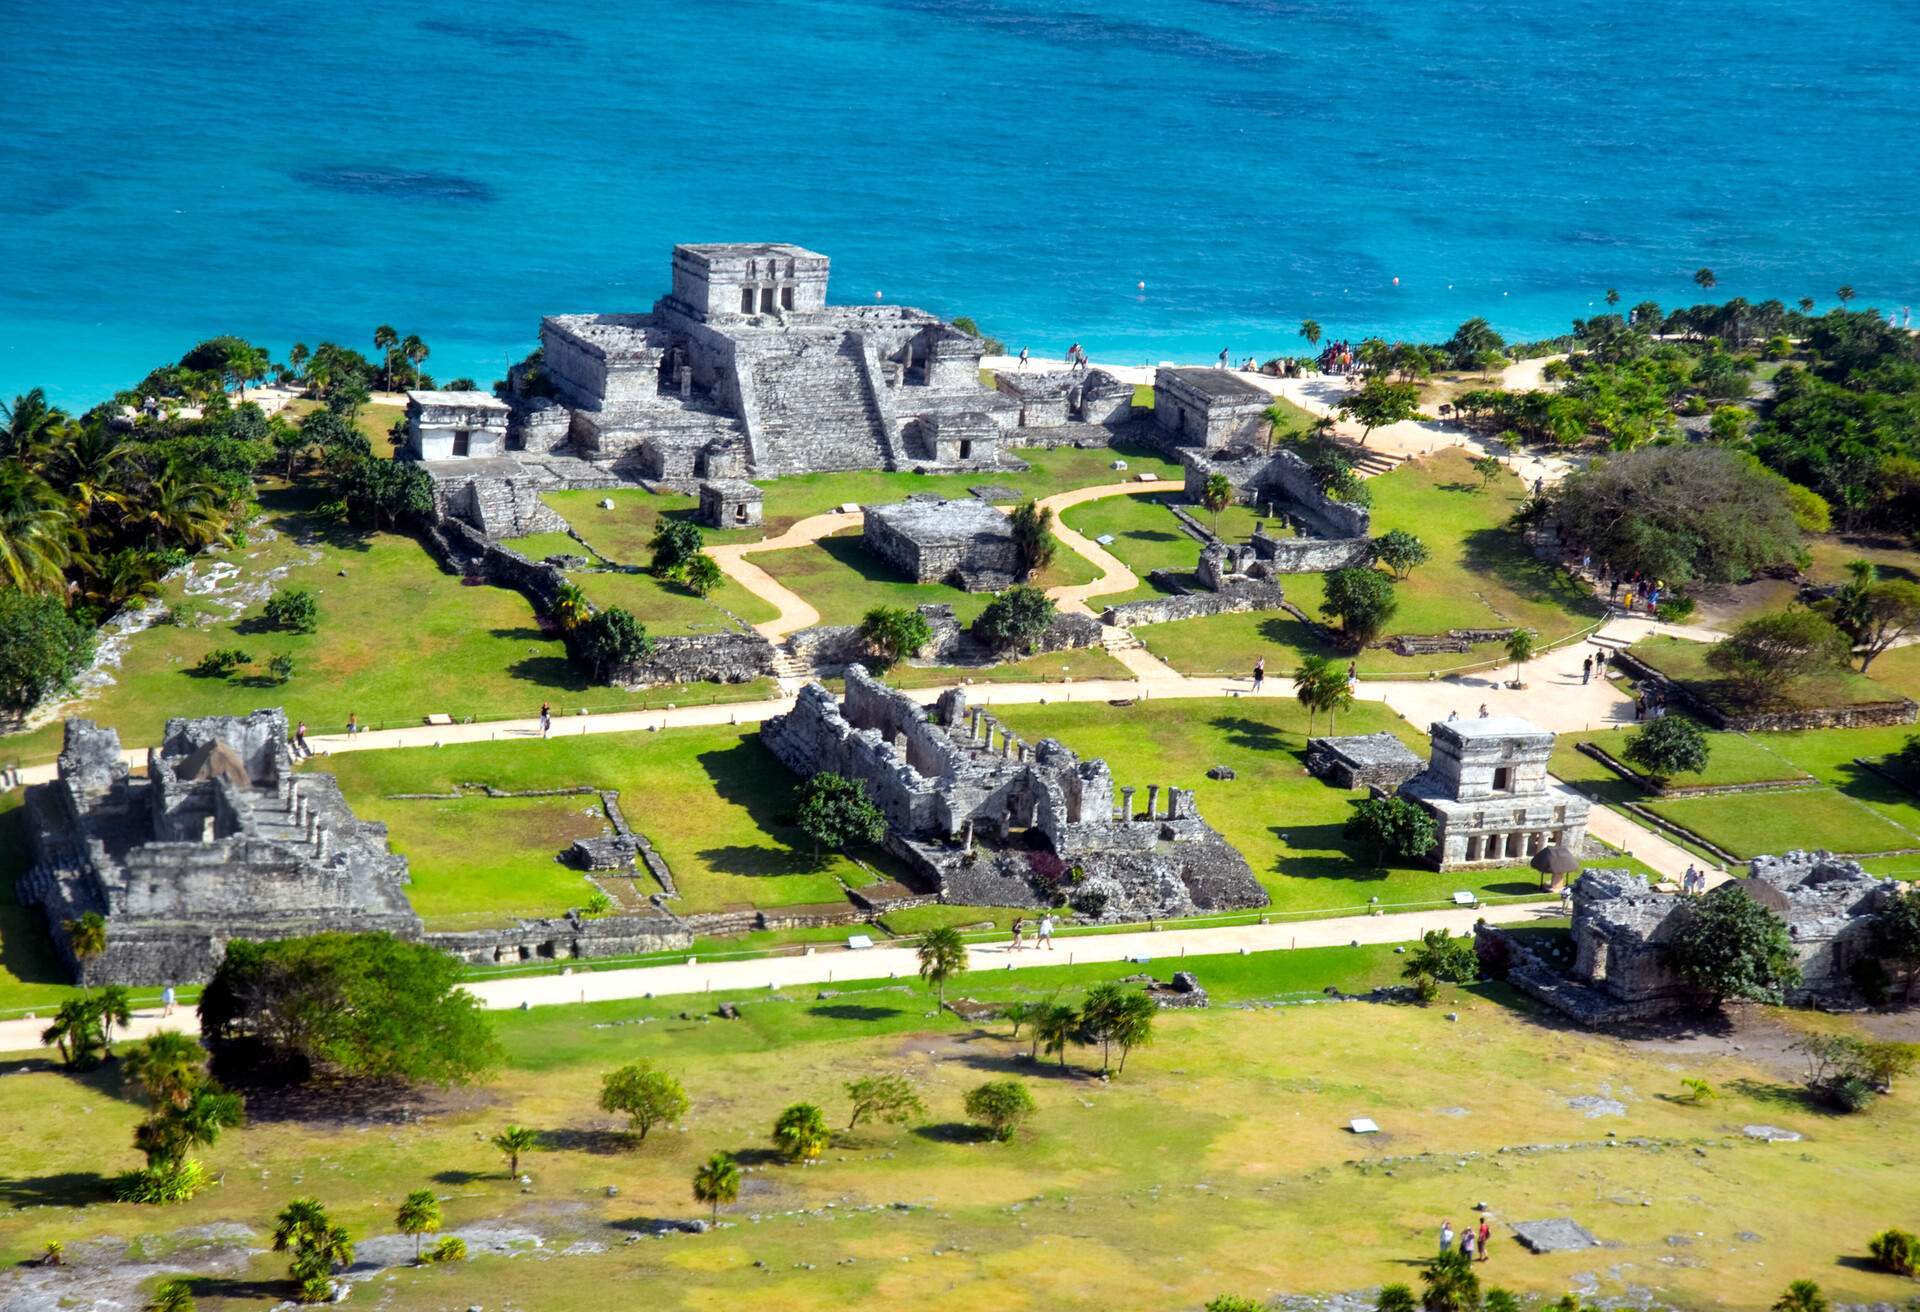 DEST_MEXICO_TULUM_MAYAN_RUINS_ARCHEOLOGICAL_SITE_GettyImages-520432248